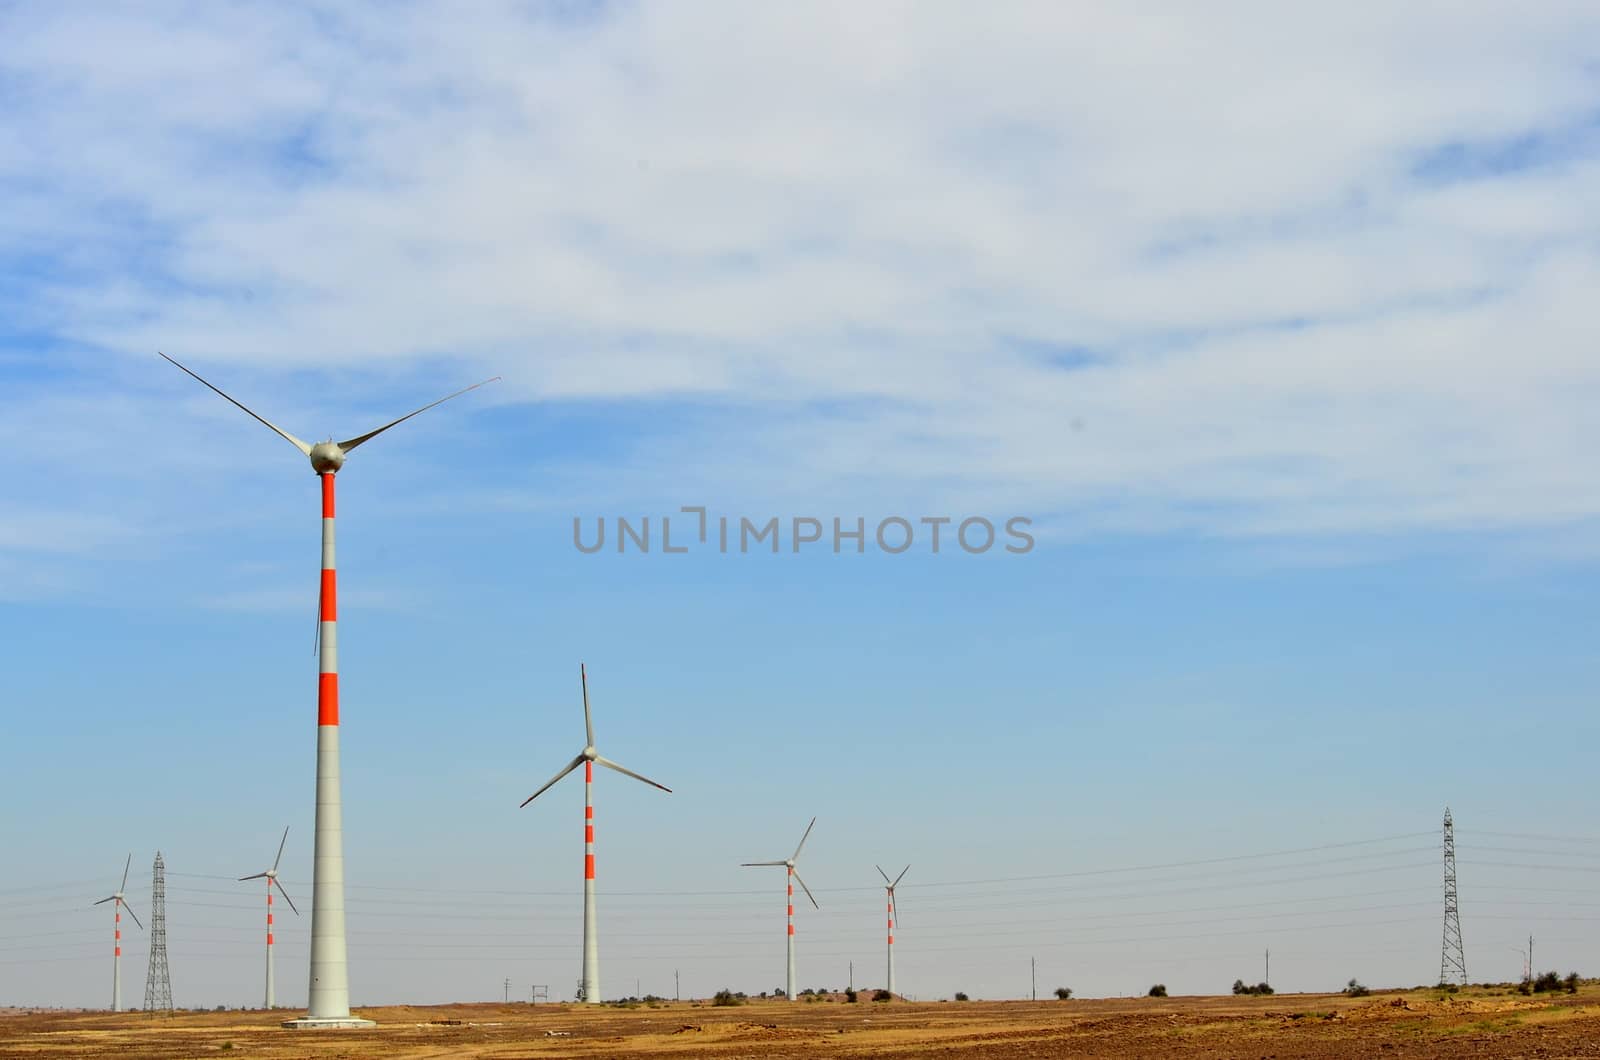 Windmills on the way to Sam Sand Dunes (Thar Desert) from Jaisalmer, Rajasthan, India. The Jaisalmer Wind Park is India's 2nd largest operational onshore wind farm.